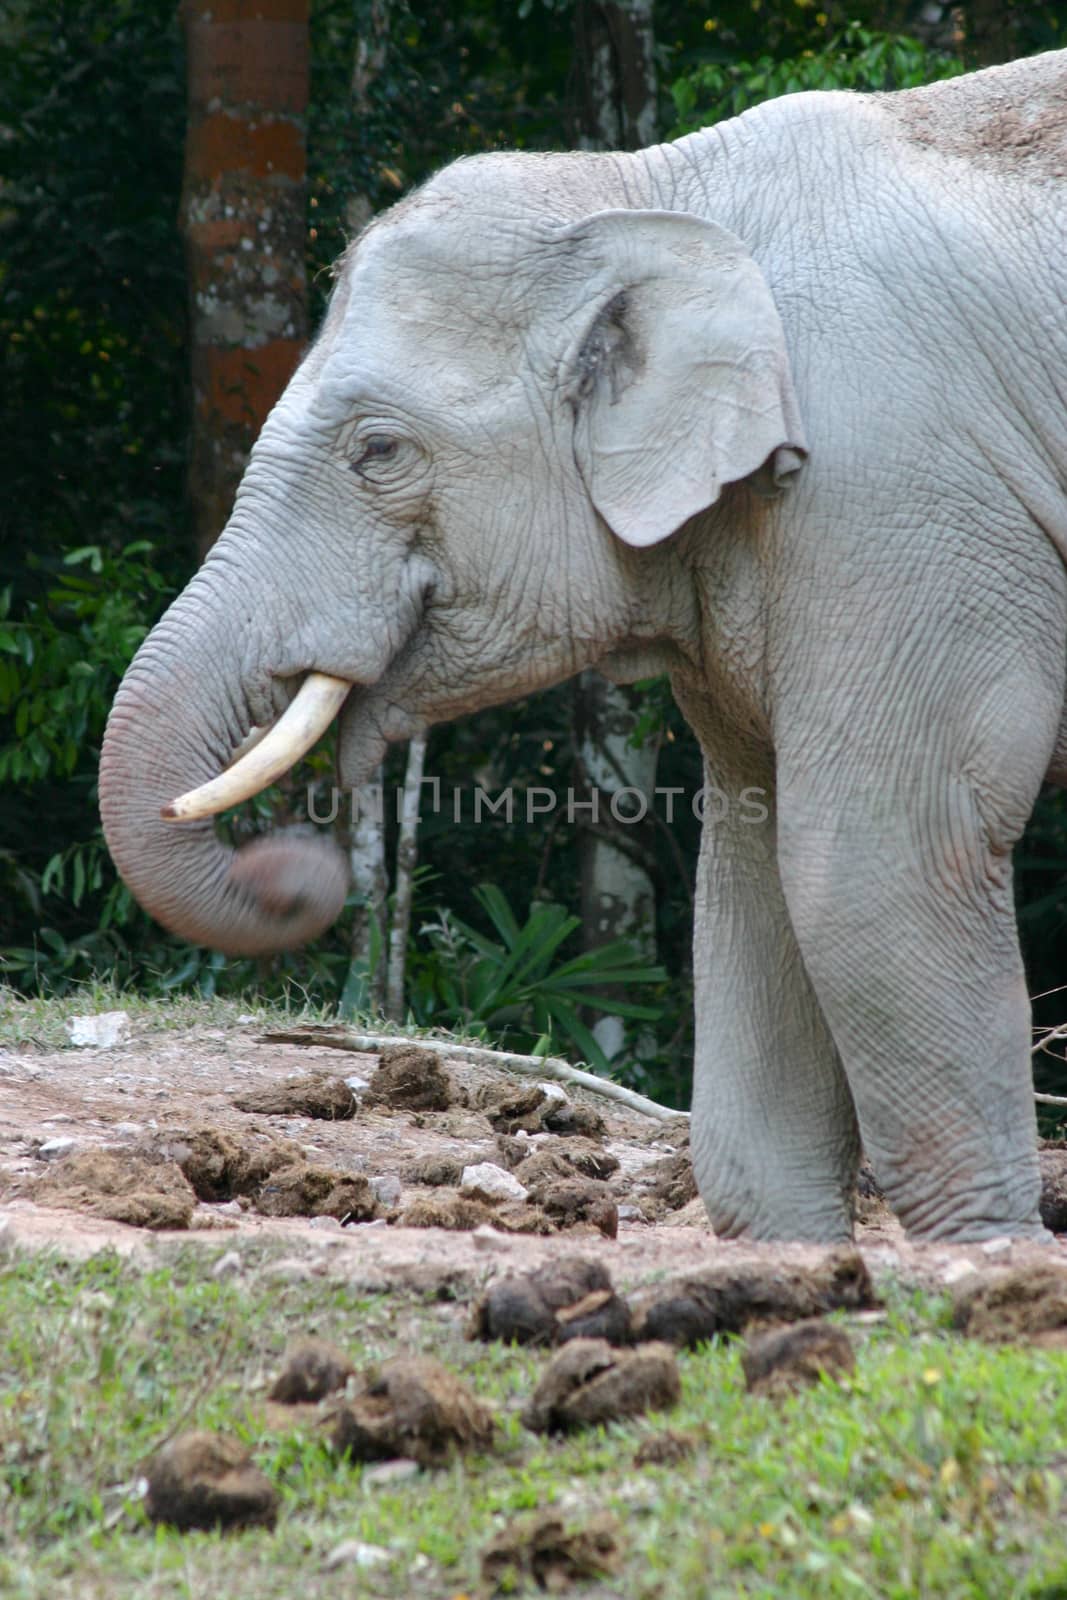 asia elephant in tropical forest, thailand